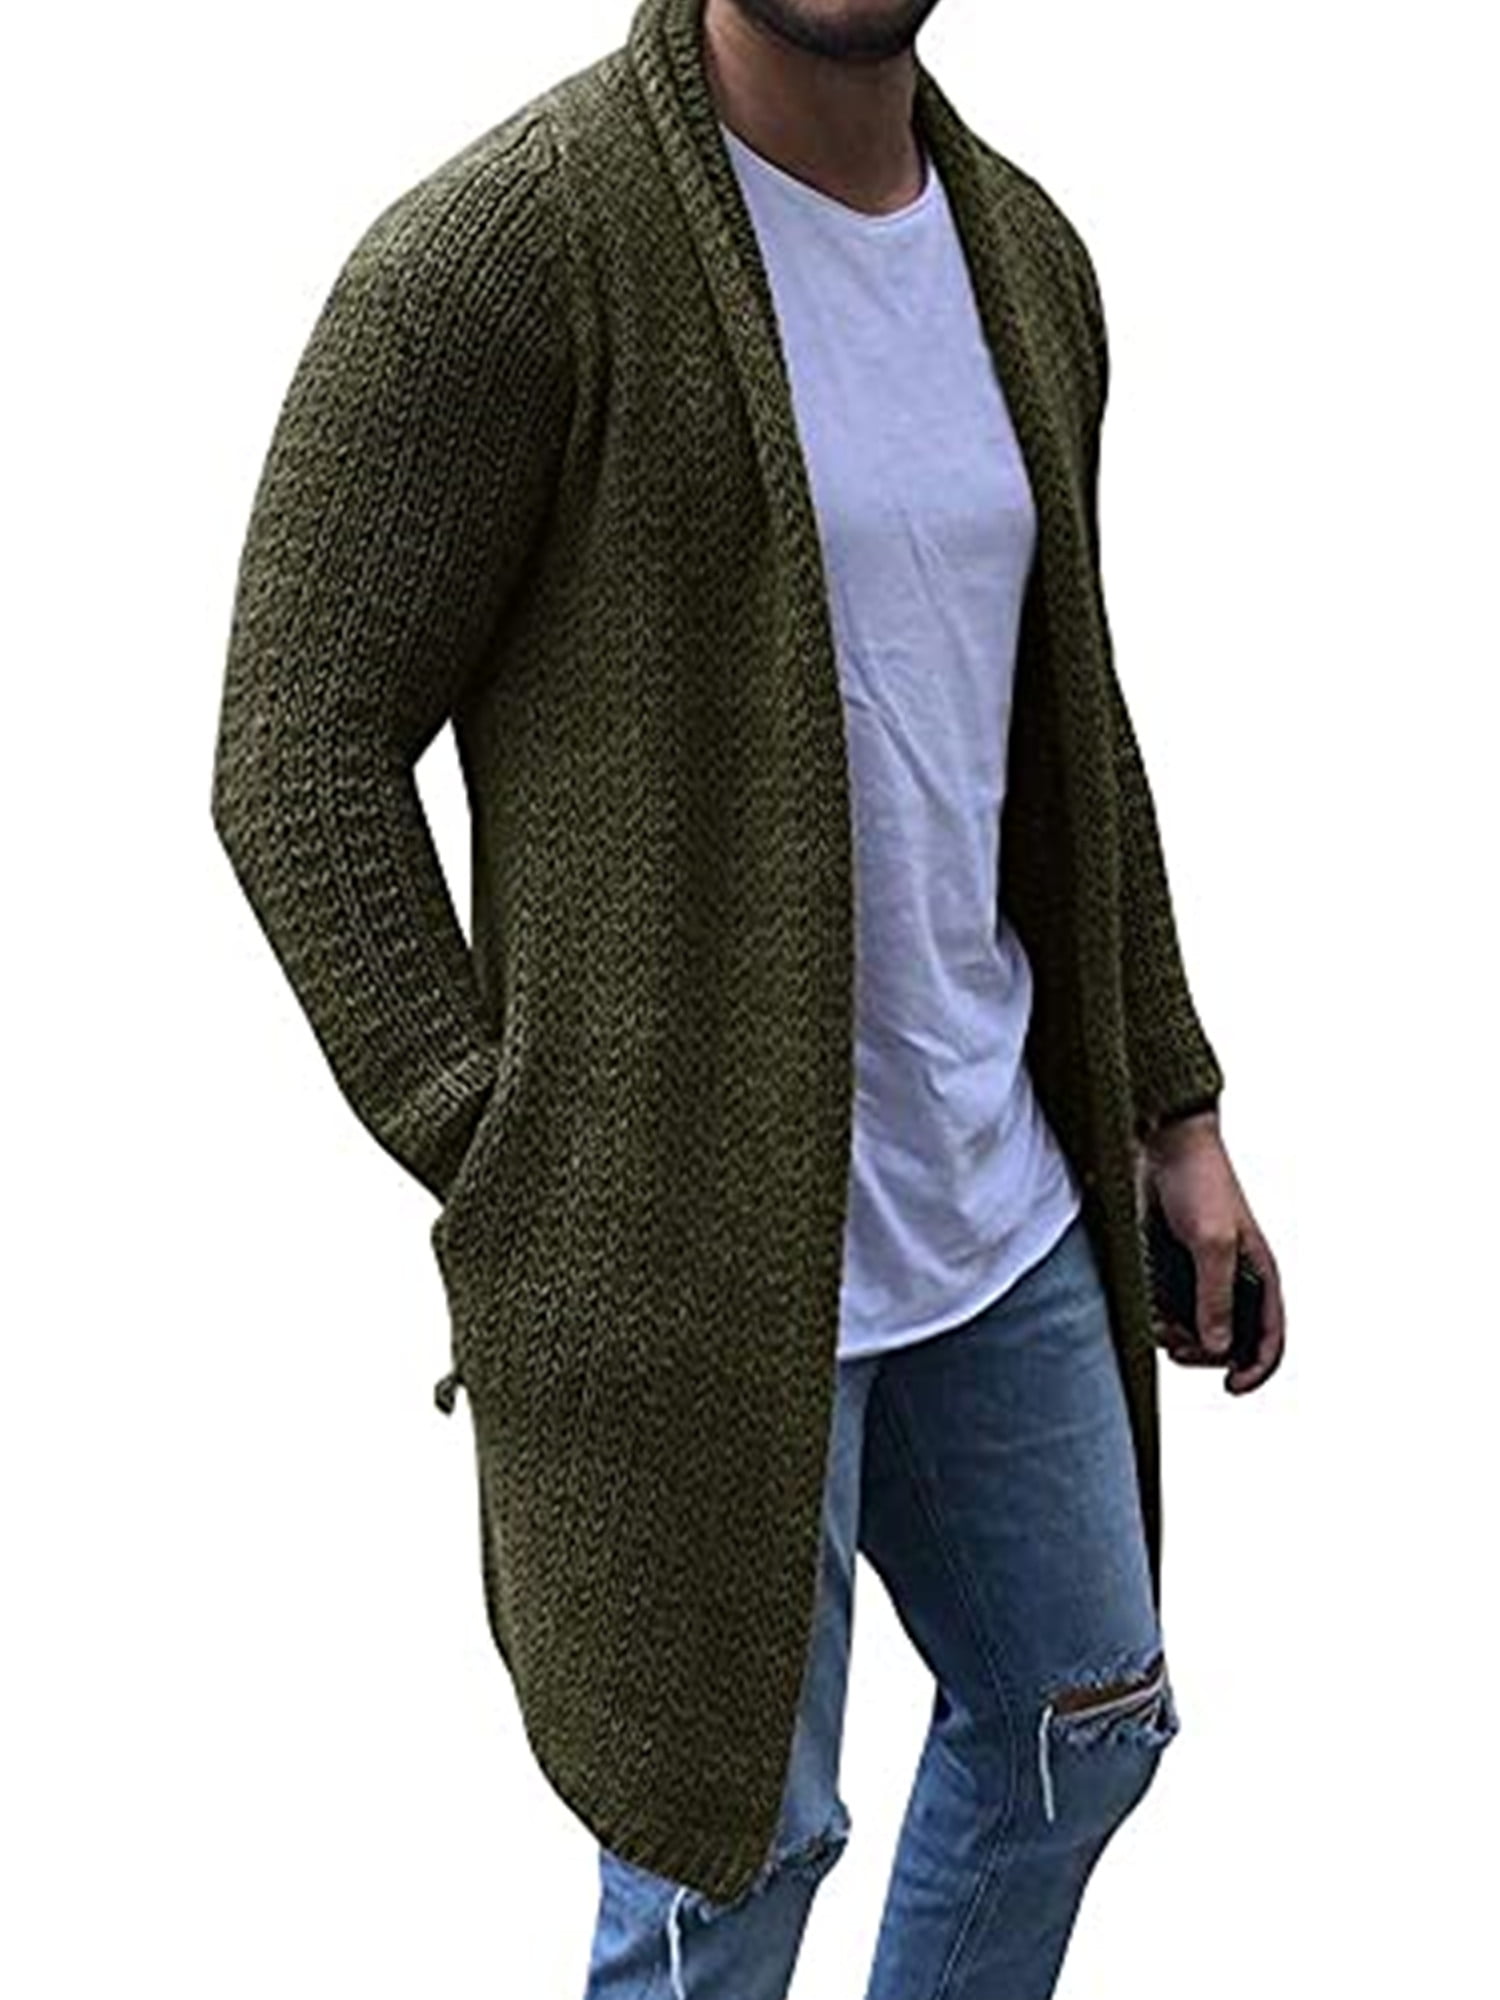 Nicelly Mens Classic Knitting Chic Soft Hit Color Long-Sleeve Pullover Sweater 